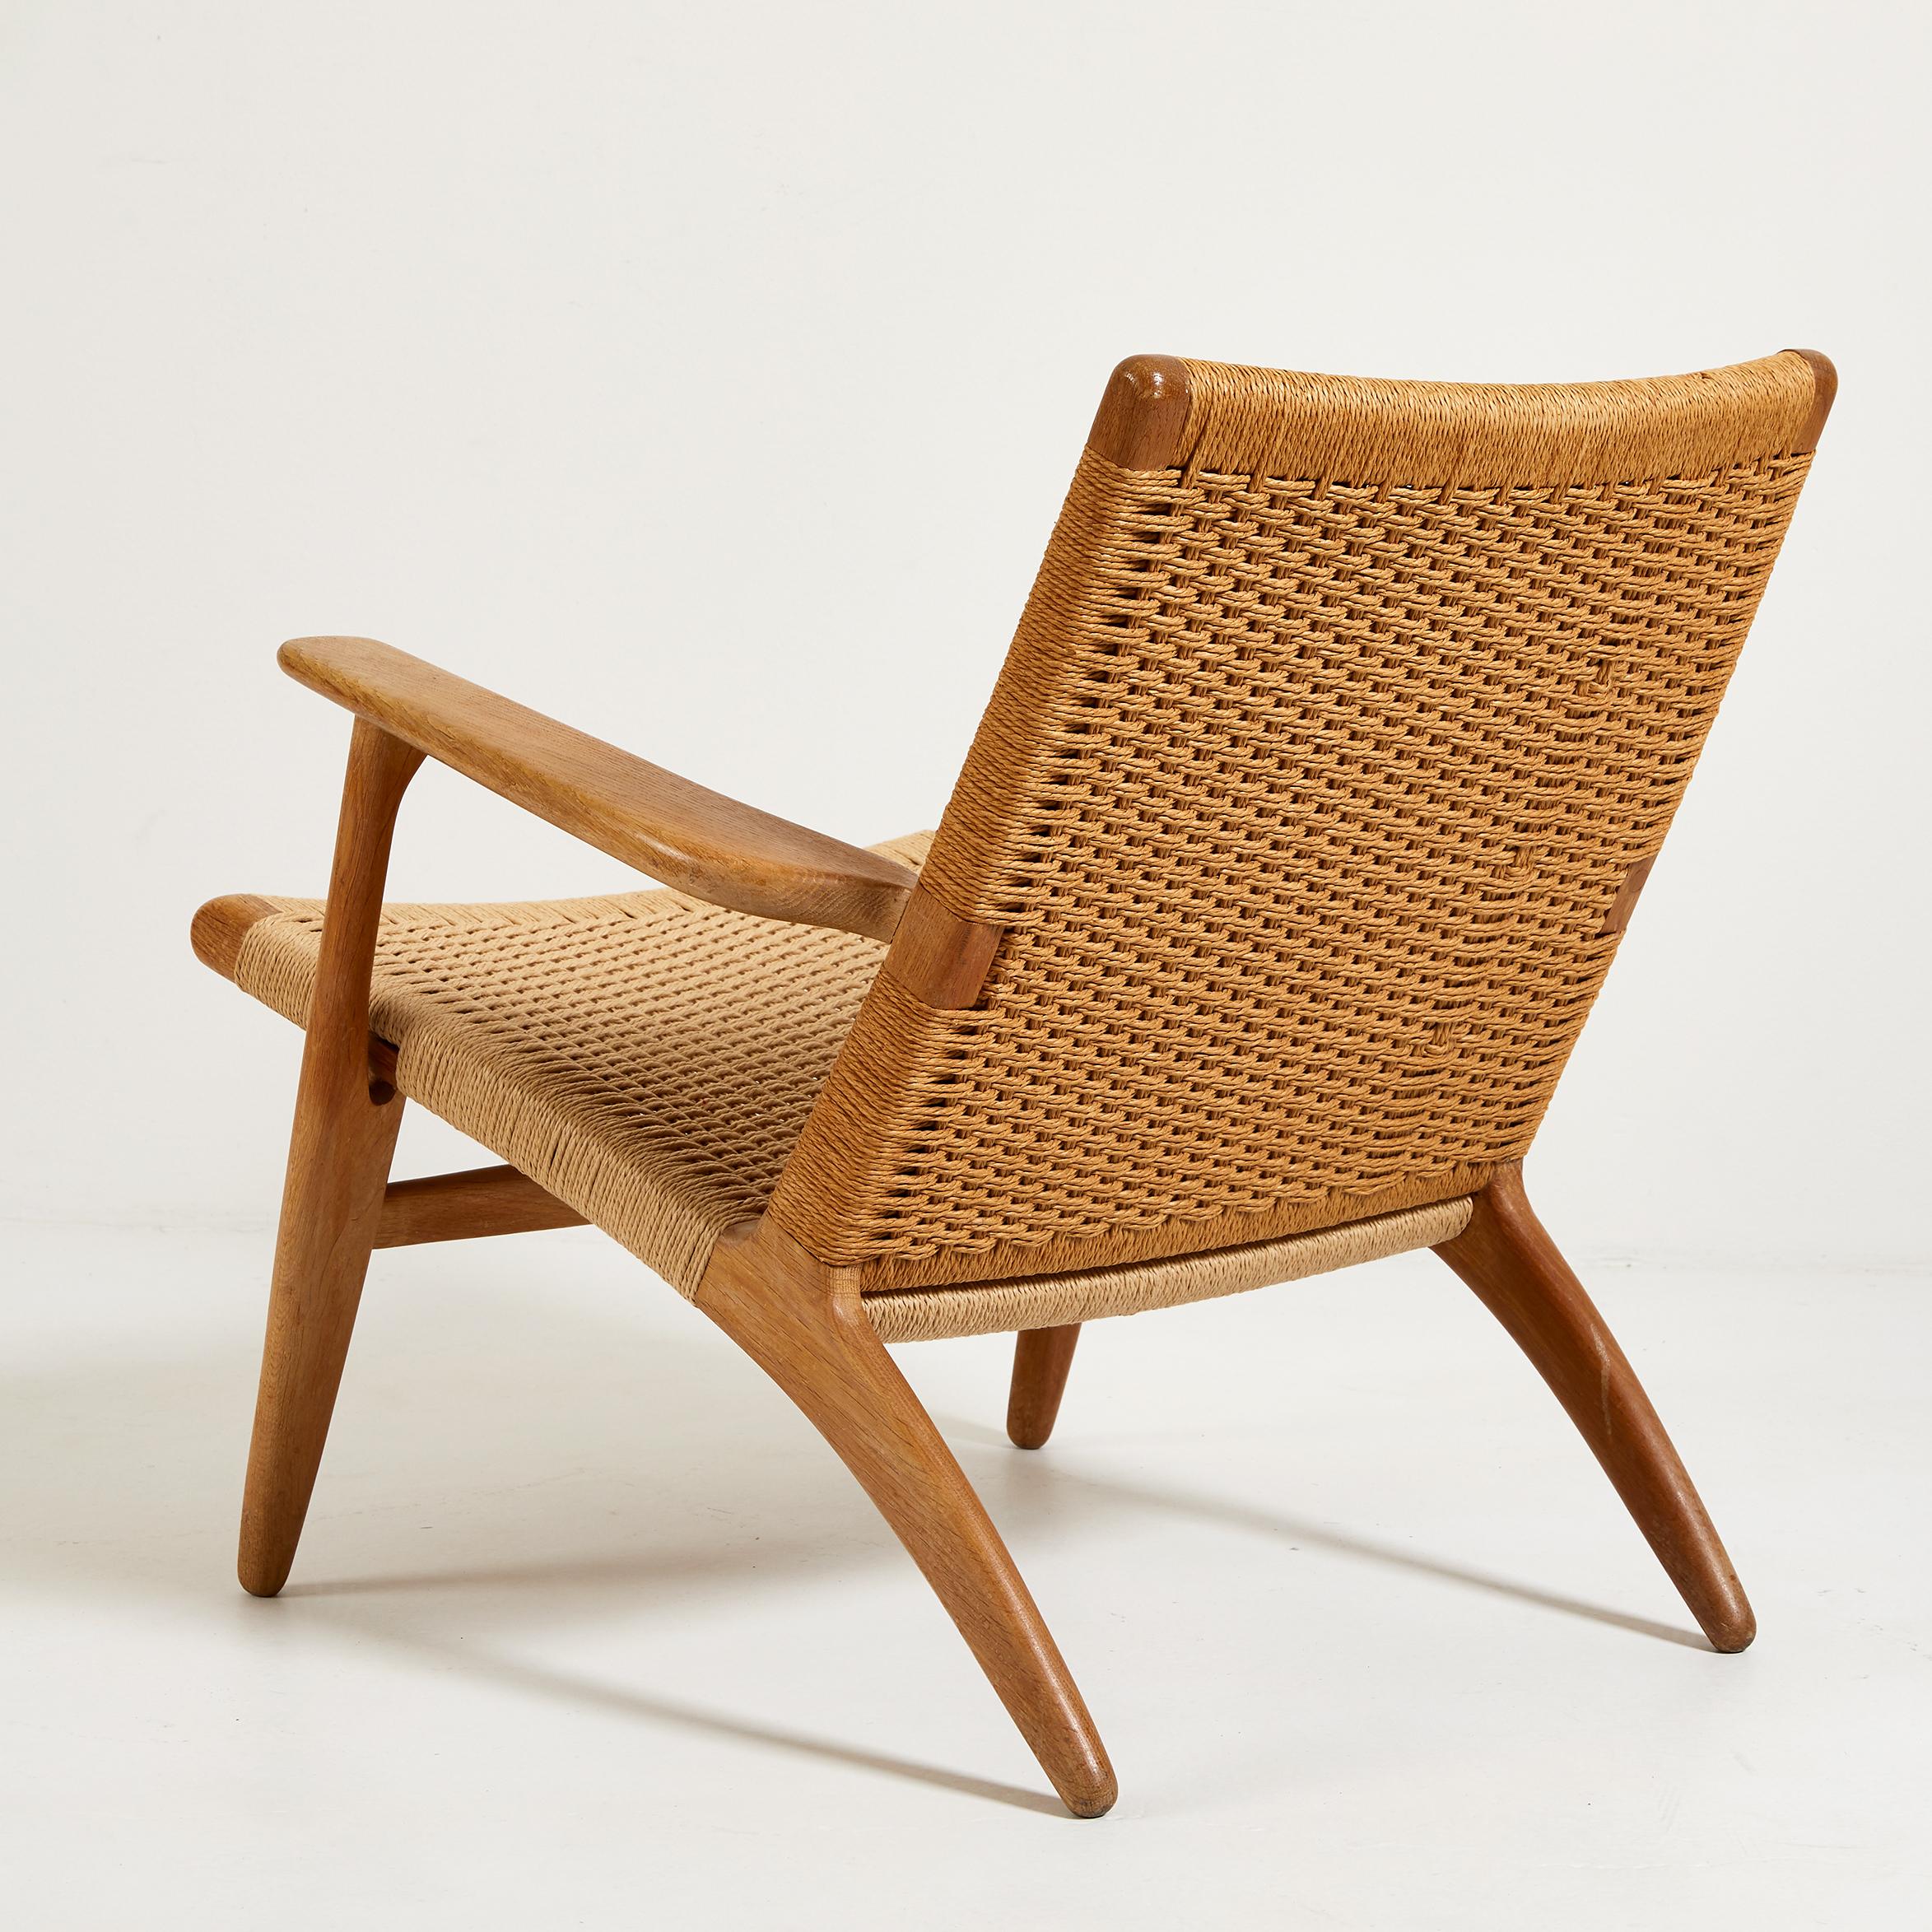 Hans Wegner for Carl Hansen & Son CH 25 lounge chair. Very good condition, marked on underside with Danish maker's label. Frame made in oiled oak. New papercord seat and back restored to exacting standards as the original. This is an original, early